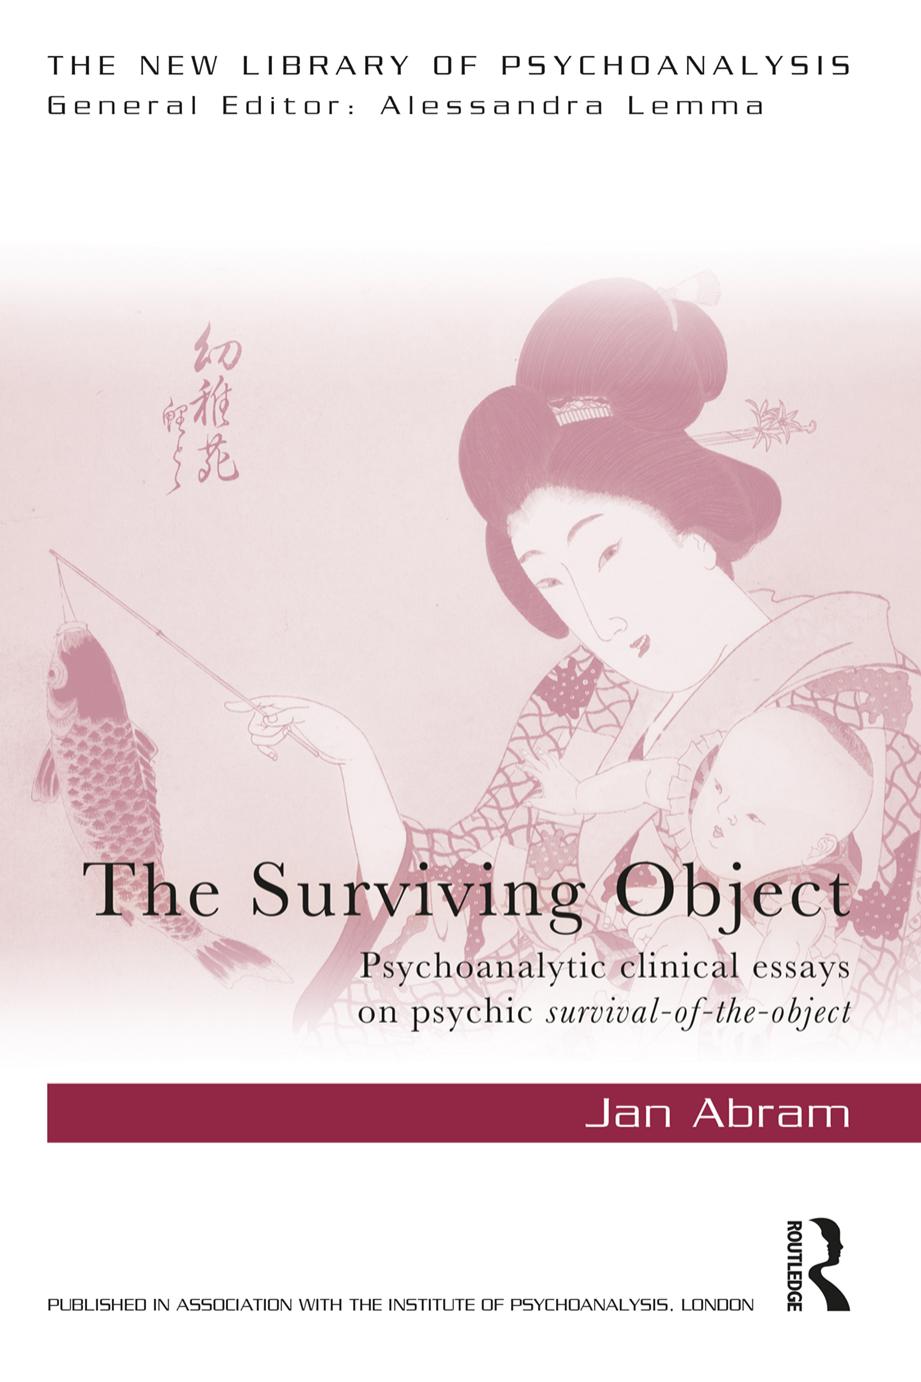 The Surviving Object: Psychoanalytic clinical essays on psychic survival-of-the-object by Jan Abram